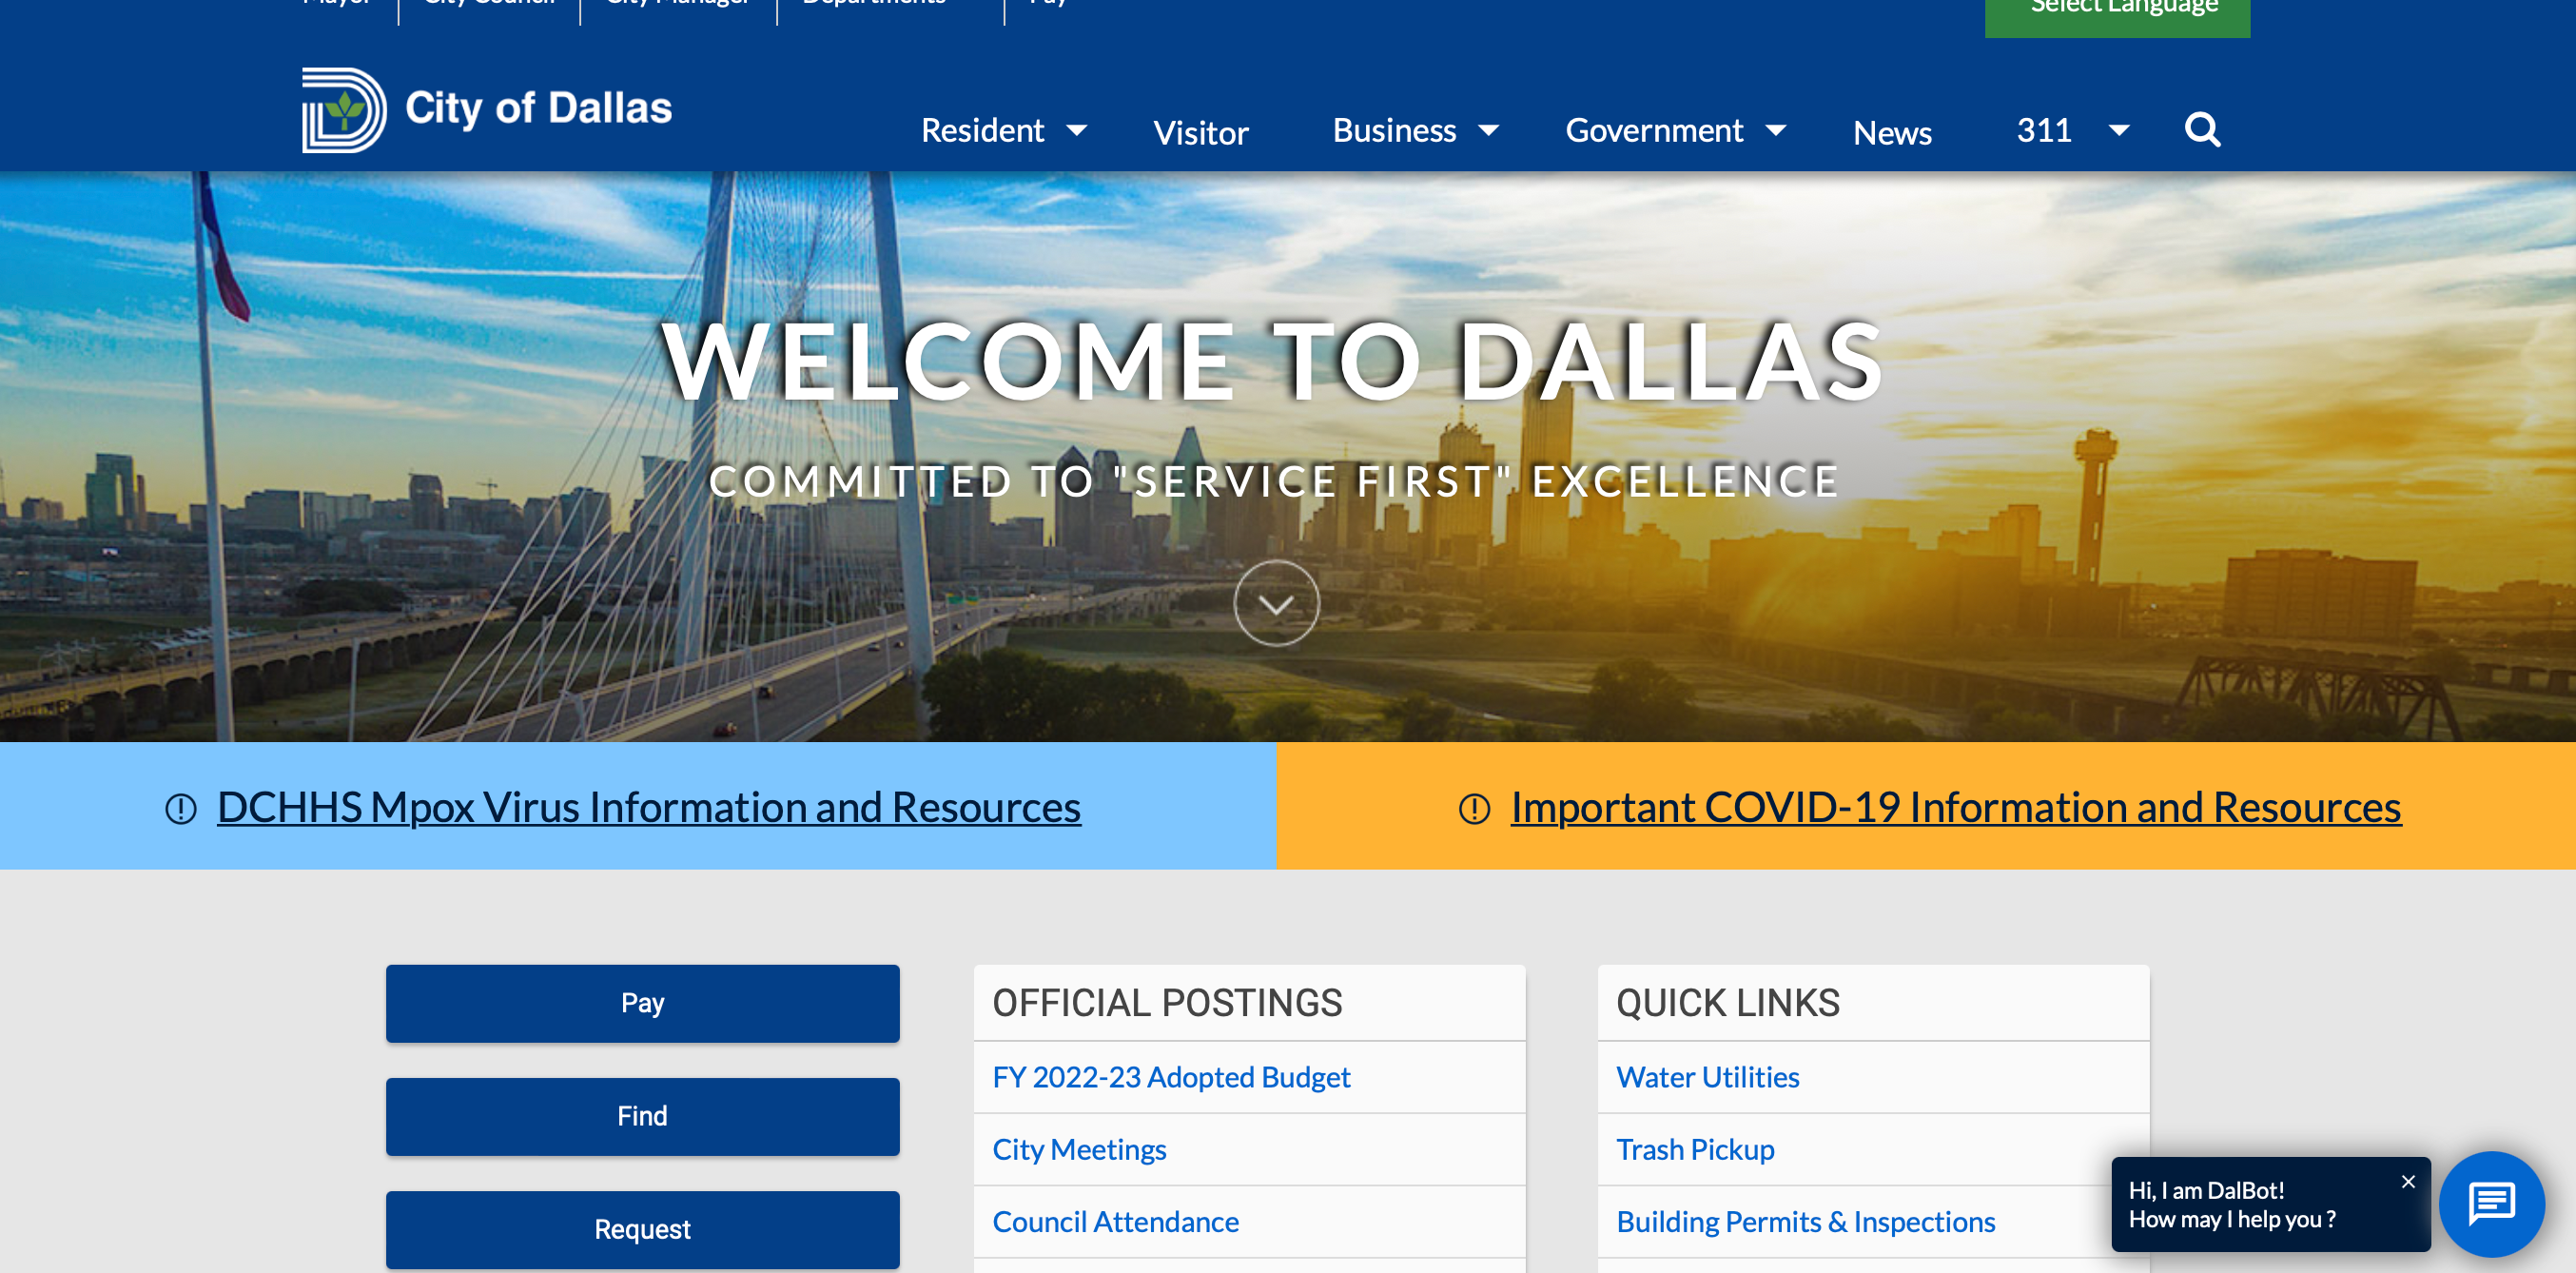 Communicate the specific value of your city in your website, like Dallas does here.